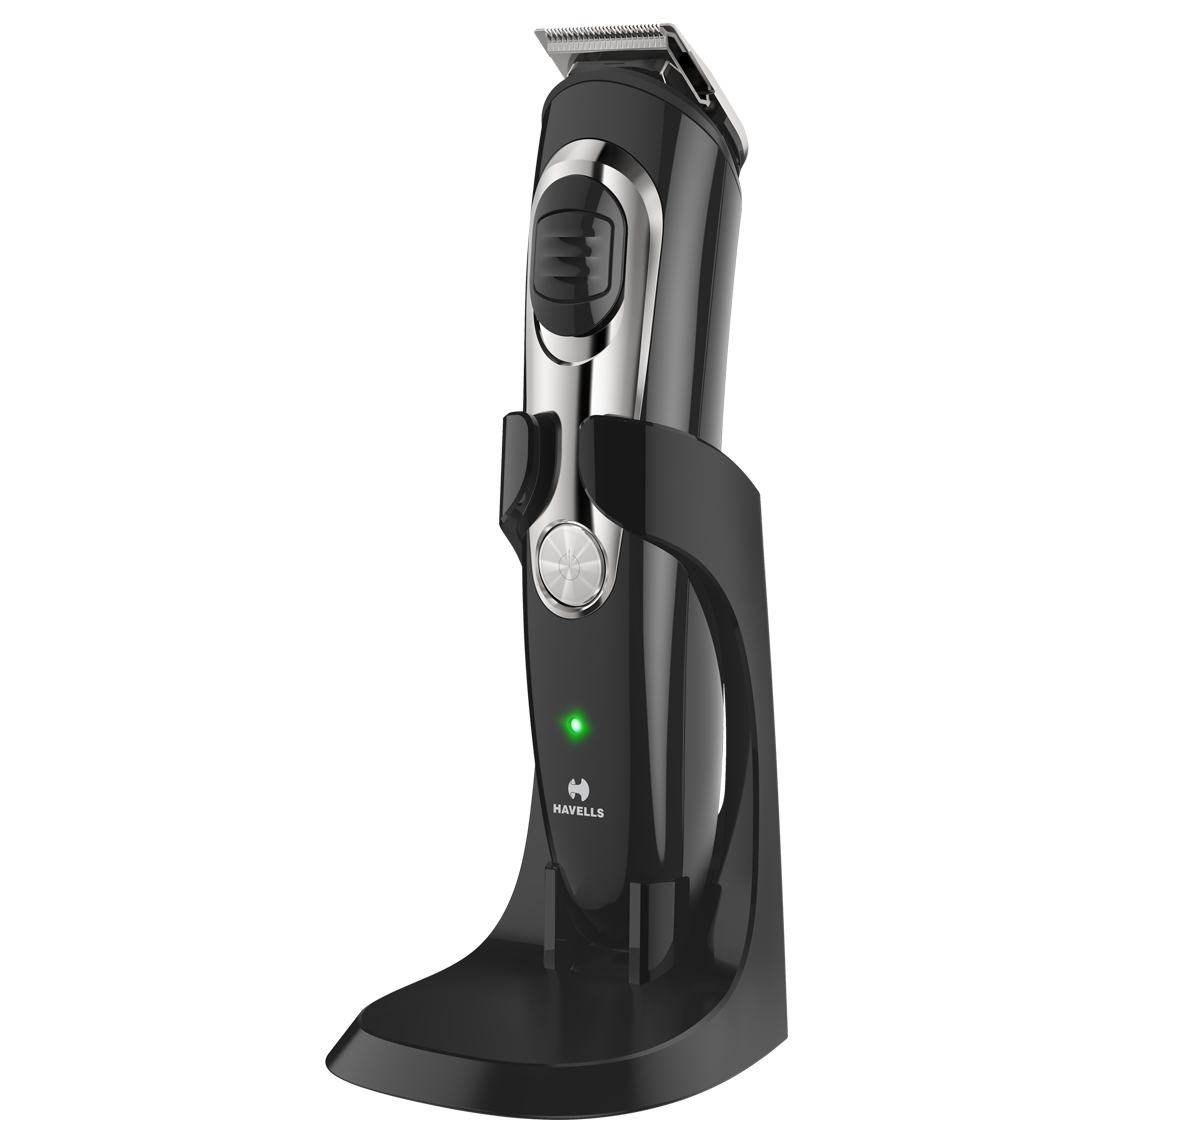 Trimmer Chargeable Beard Download HQ PNG Image